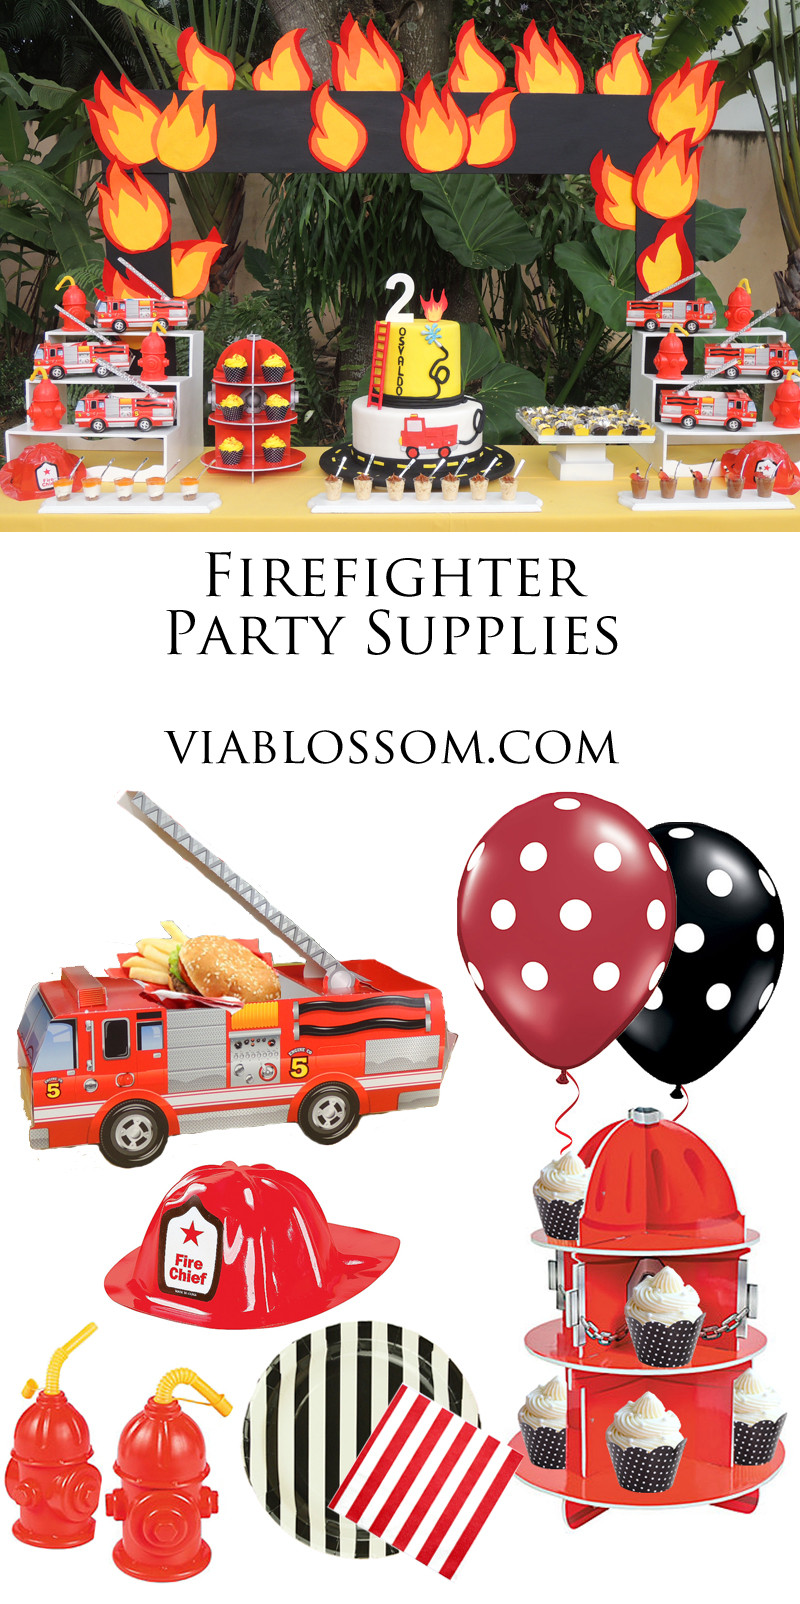 Firefighter Birthday Party Supplies
 Firefighter Birthday Party Via Blossom